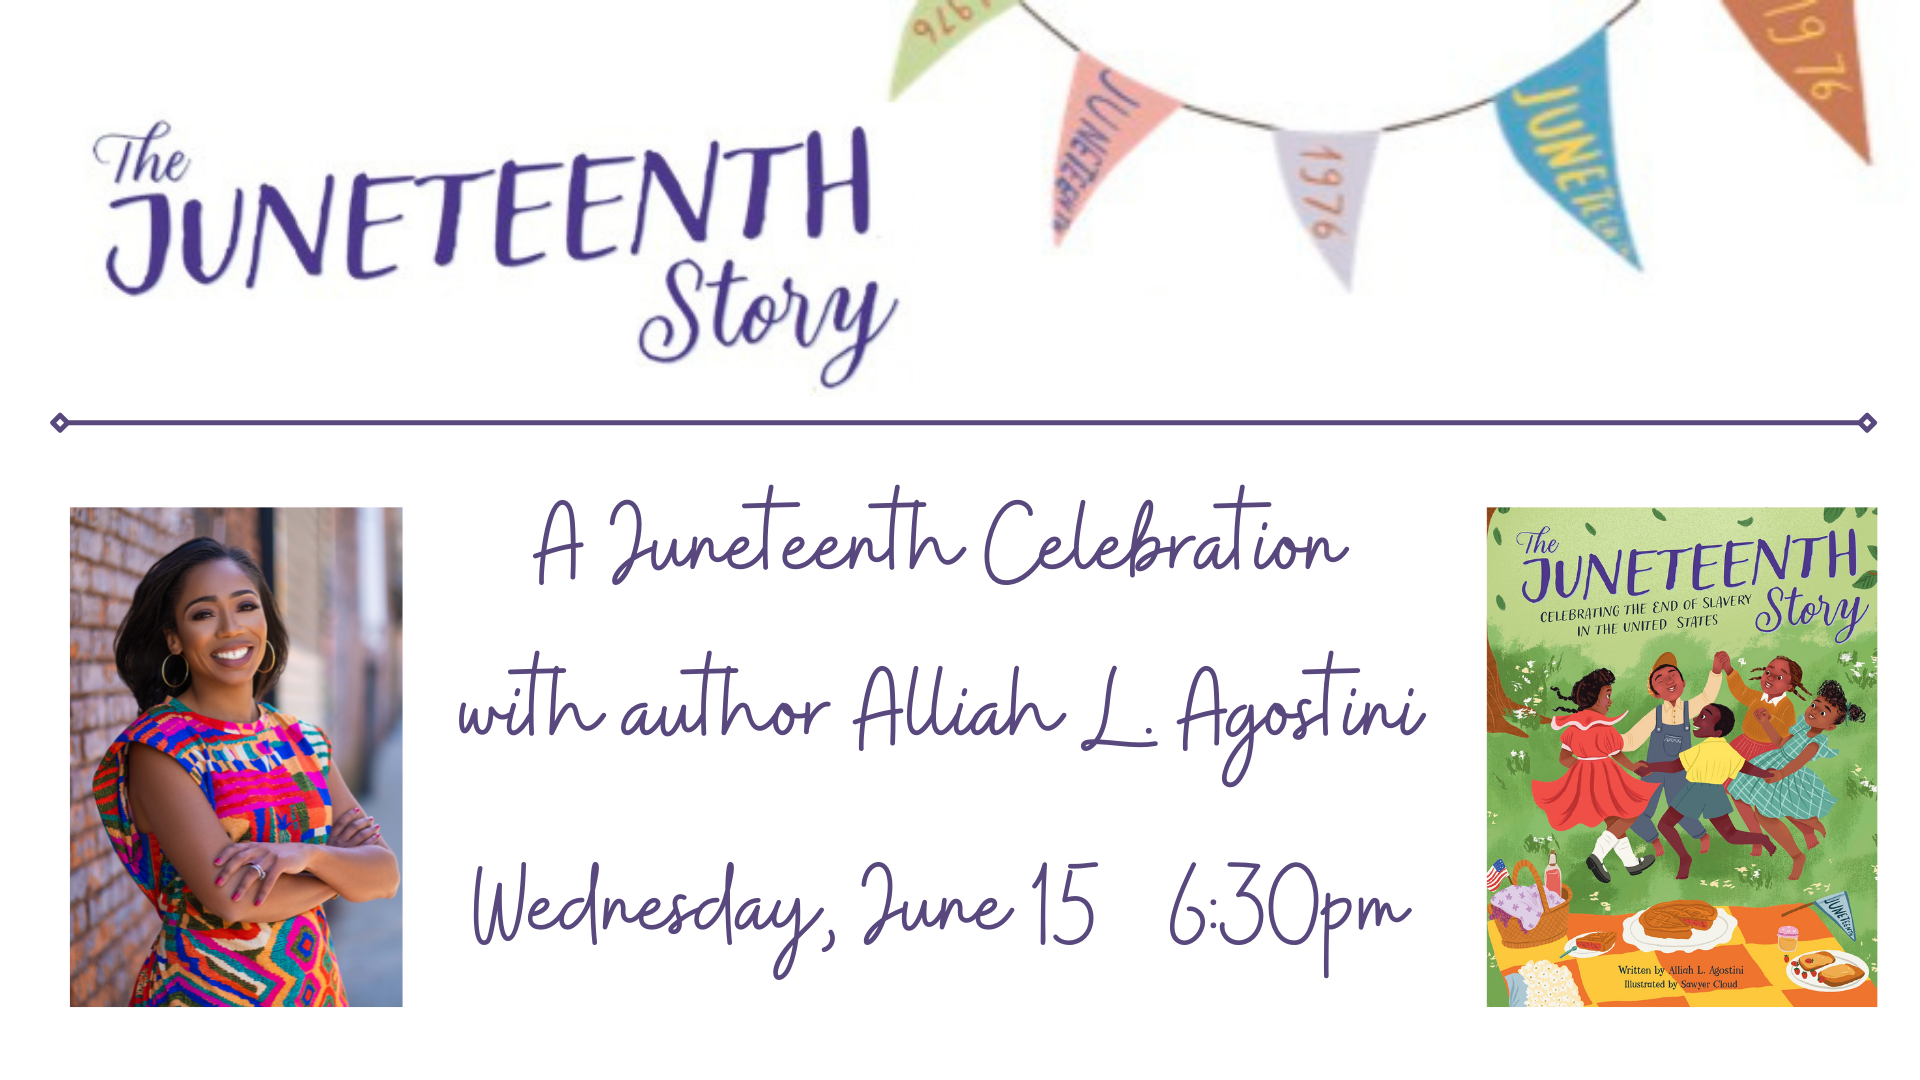 purple text reading The Juneteenth Story, a Juneteenth Celebration with author Alliah L. Agostini on a white background